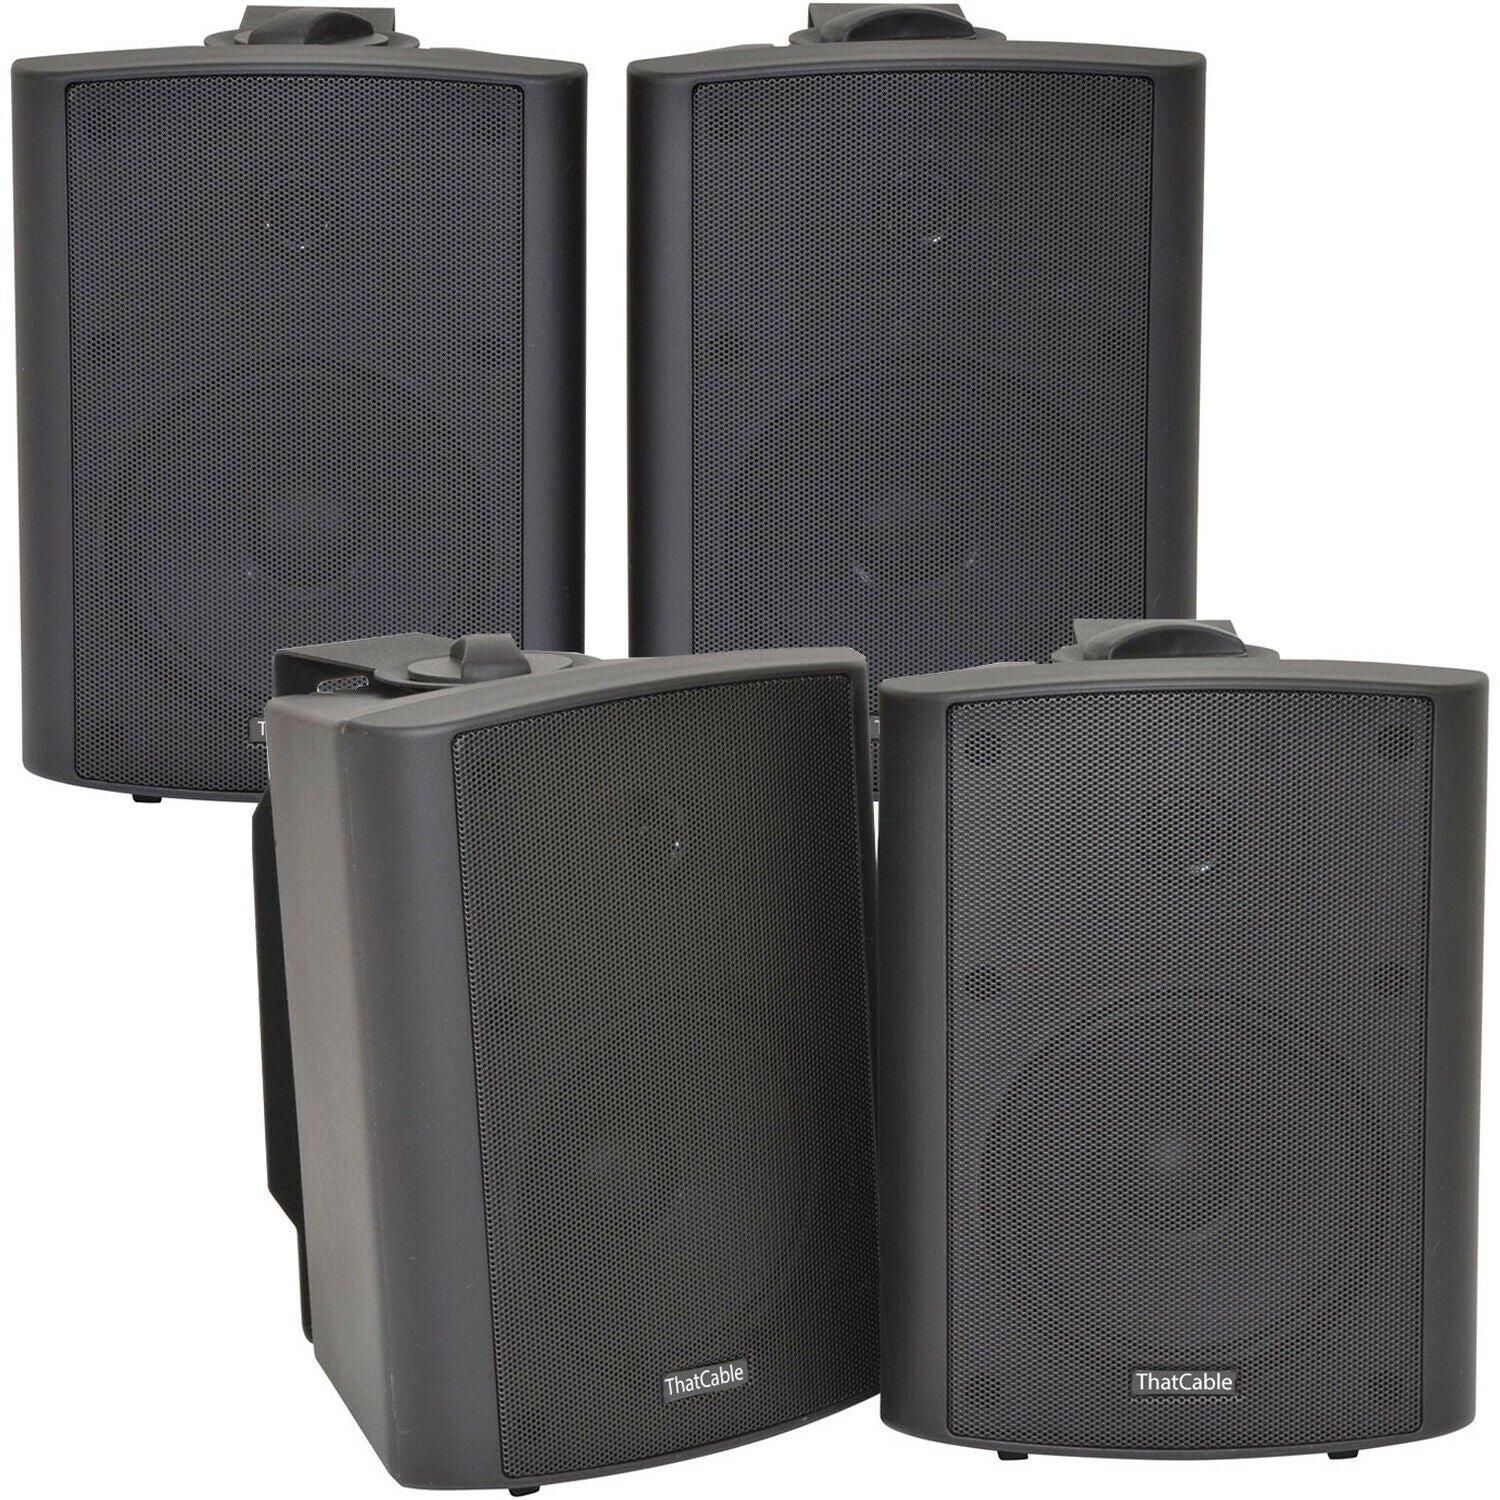 4x 120W Black Wall Mounted Stereo Speakers 6.5